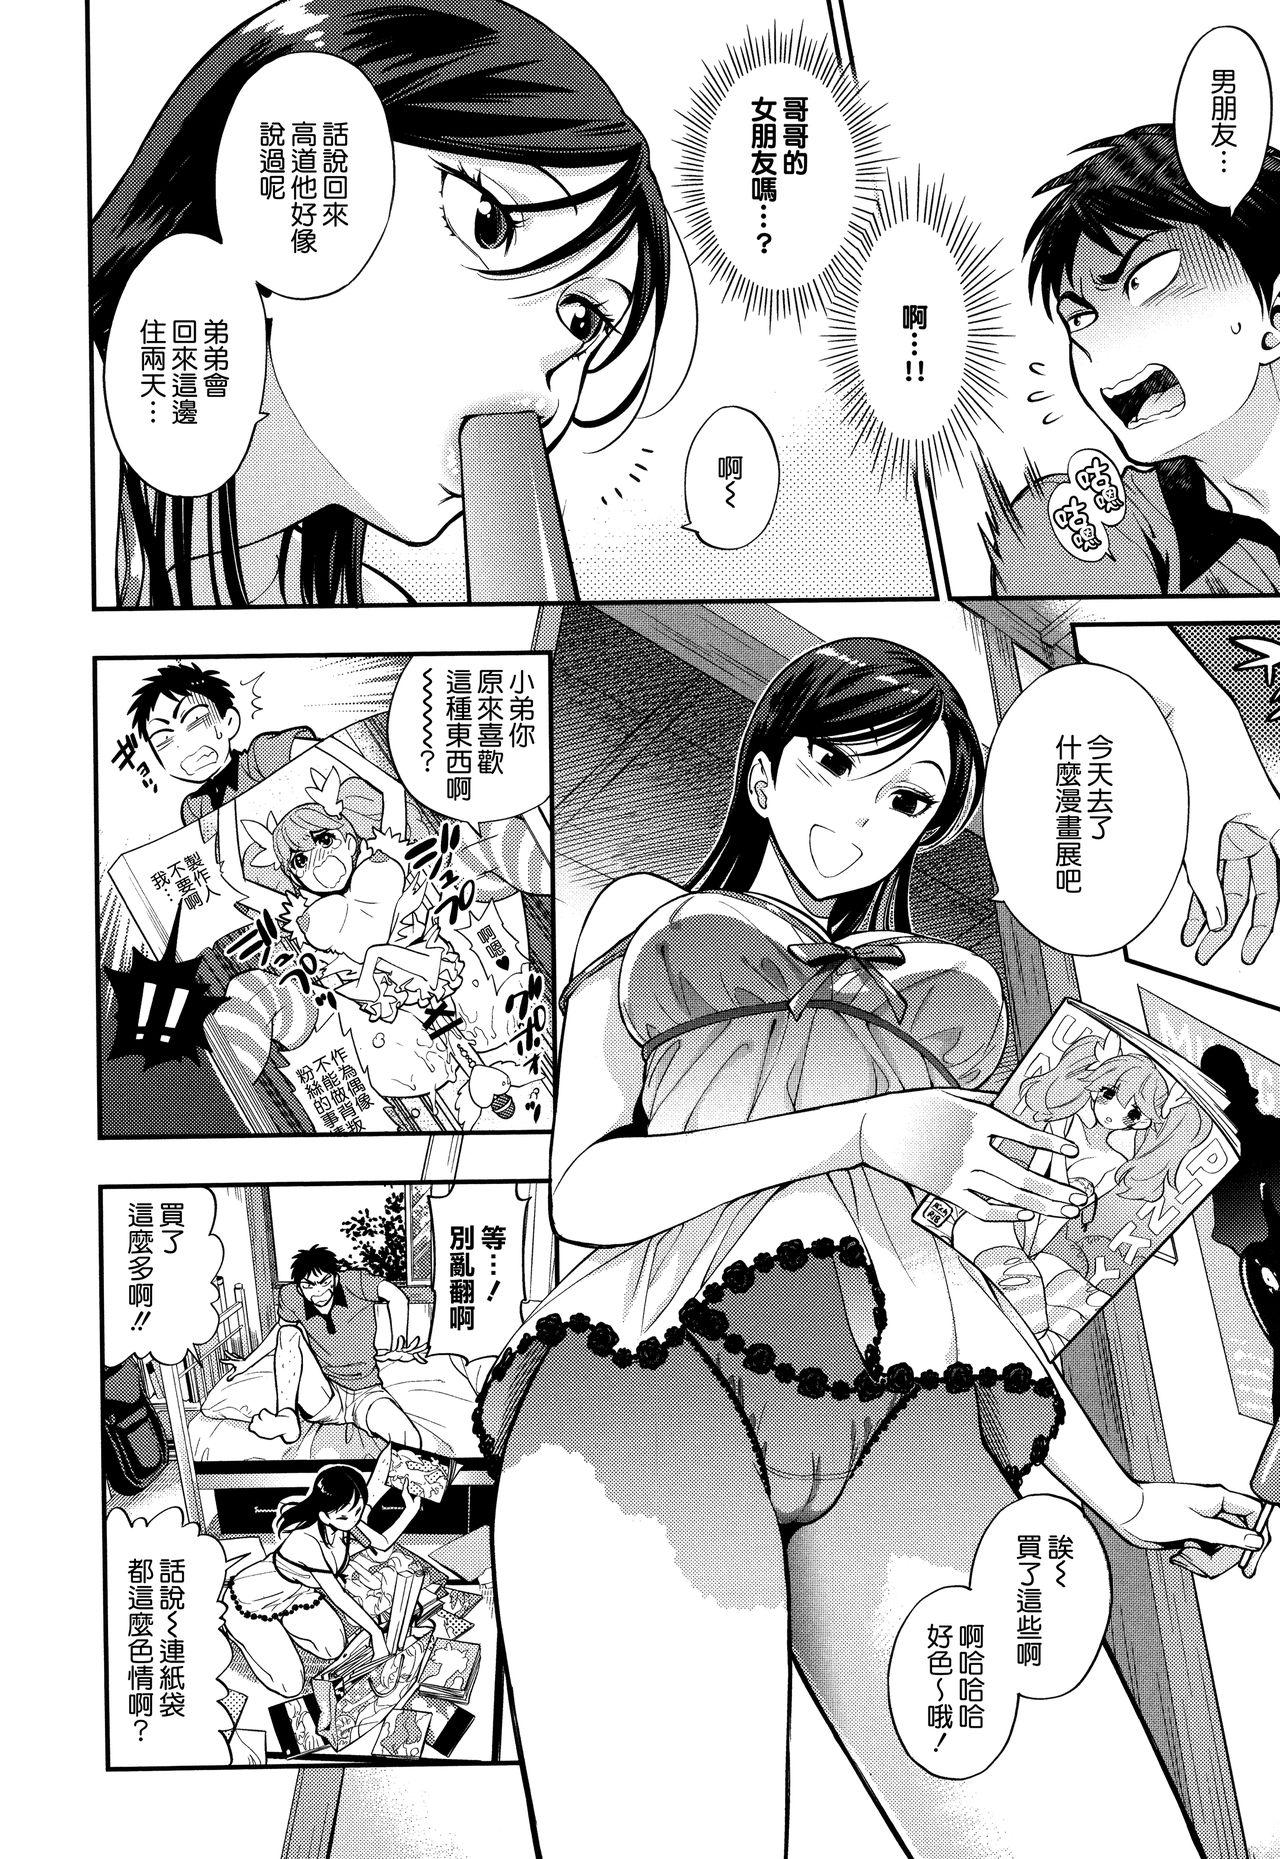 Squirting Boku no Toshiue no Kanojo - so cute my adult honey Pawg - Page 7